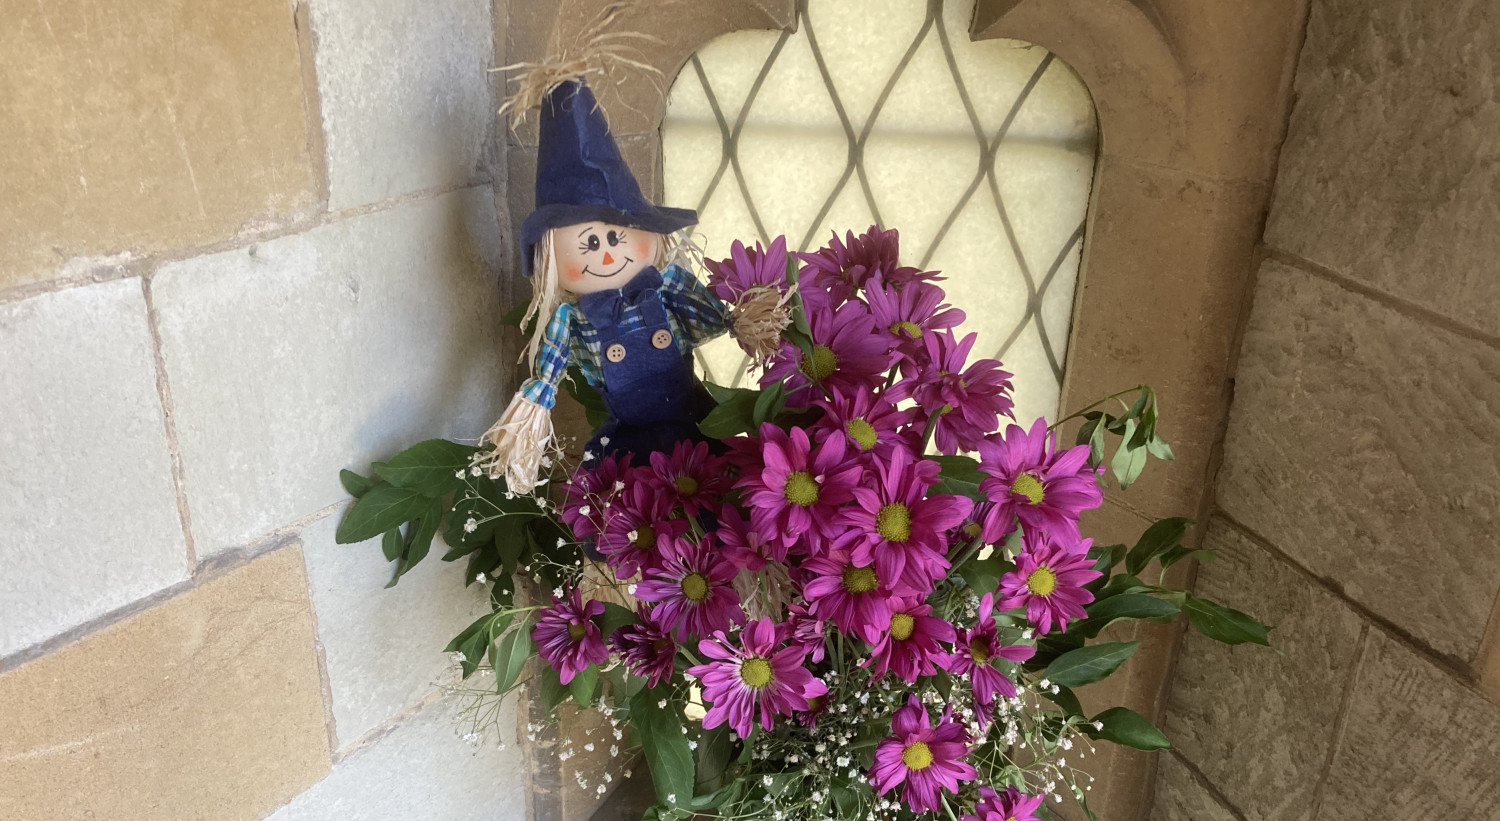 Hidden behind the flowers, another scarecrow waits to pounch.